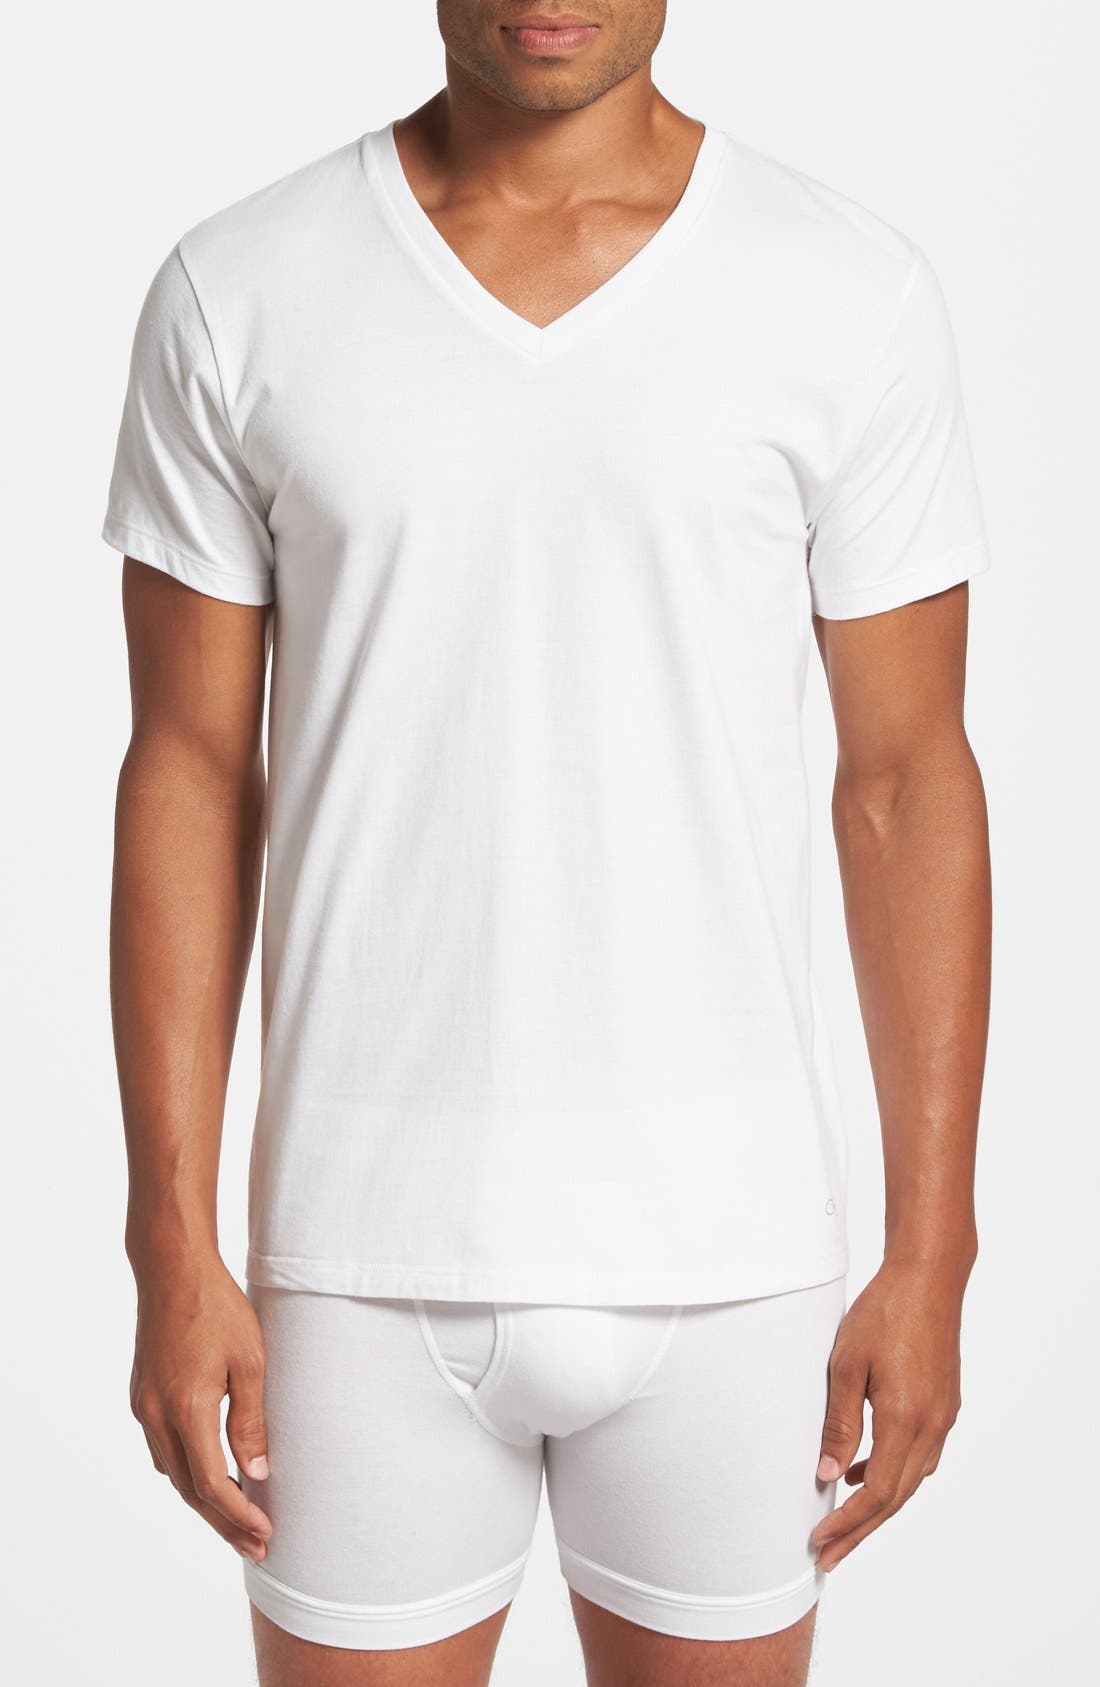 UPC 608279055129 product image for Men's Calvin Klein 3-Pack Classic Fit T-Shirt, Size Small - White | upcitemdb.com